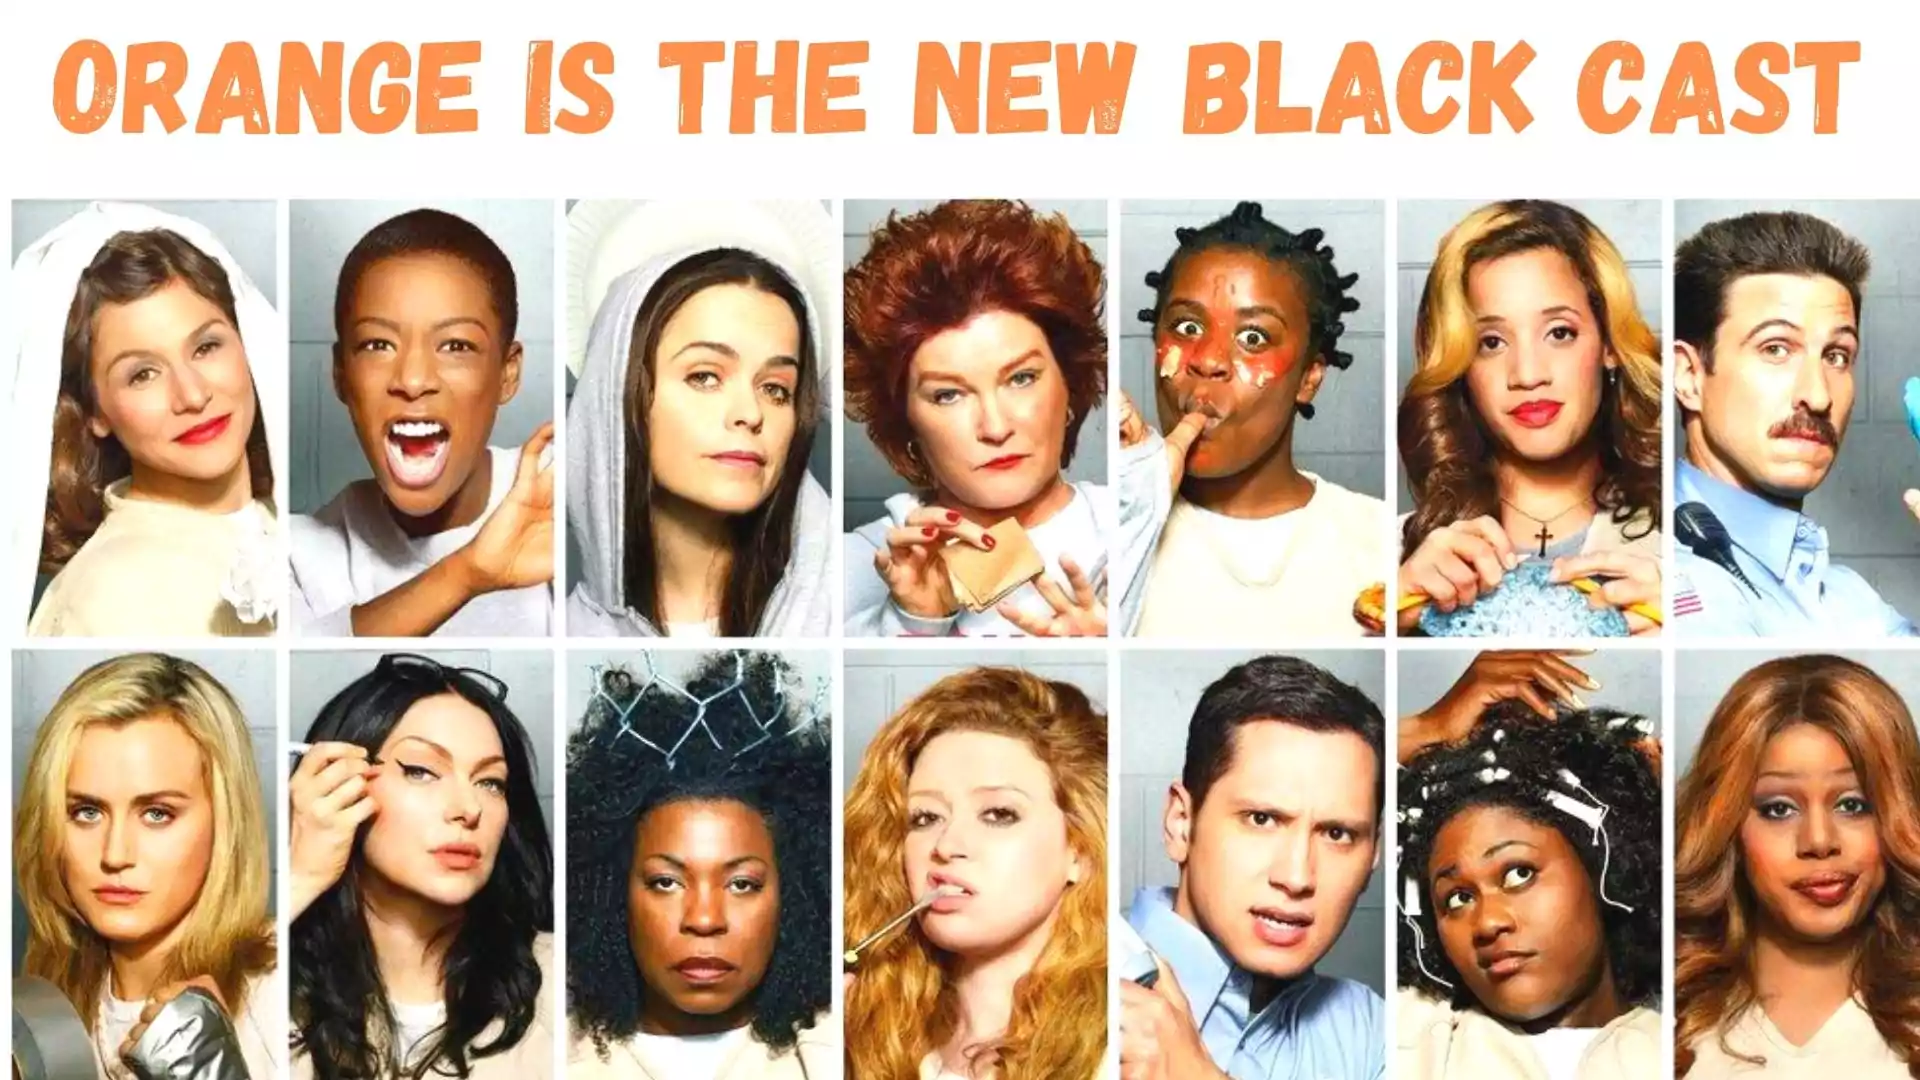 Orange Is the New Black Cast Wallpaper and images